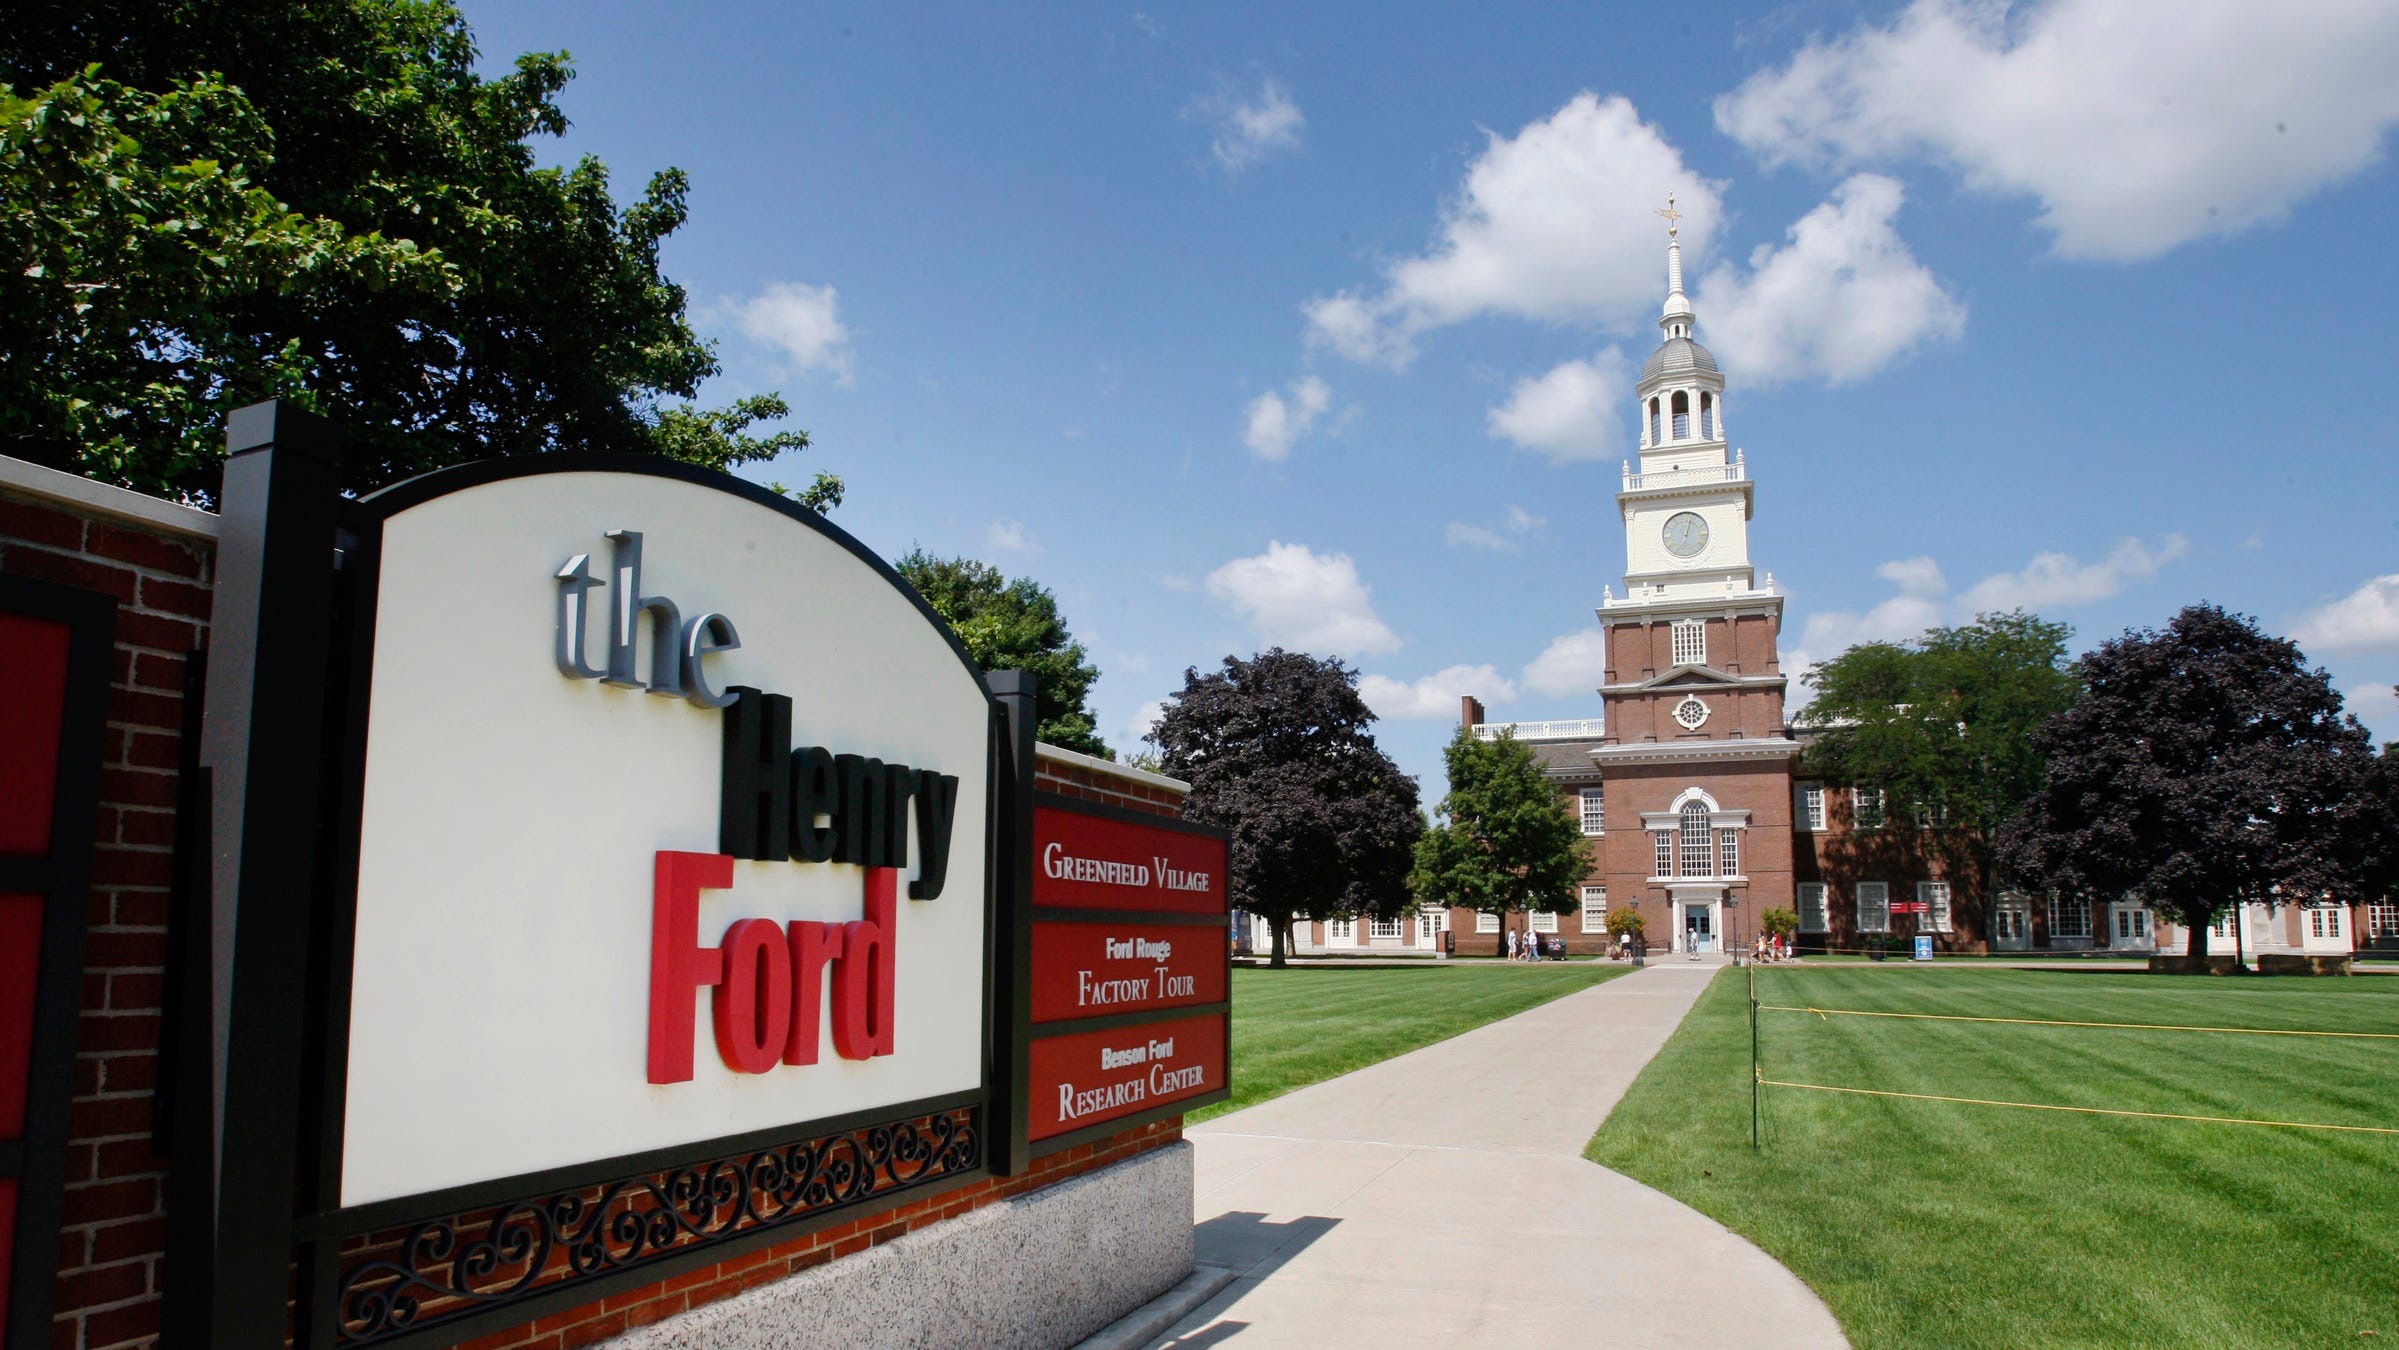 The Henry Ford museum, village to reopen in July: What to know